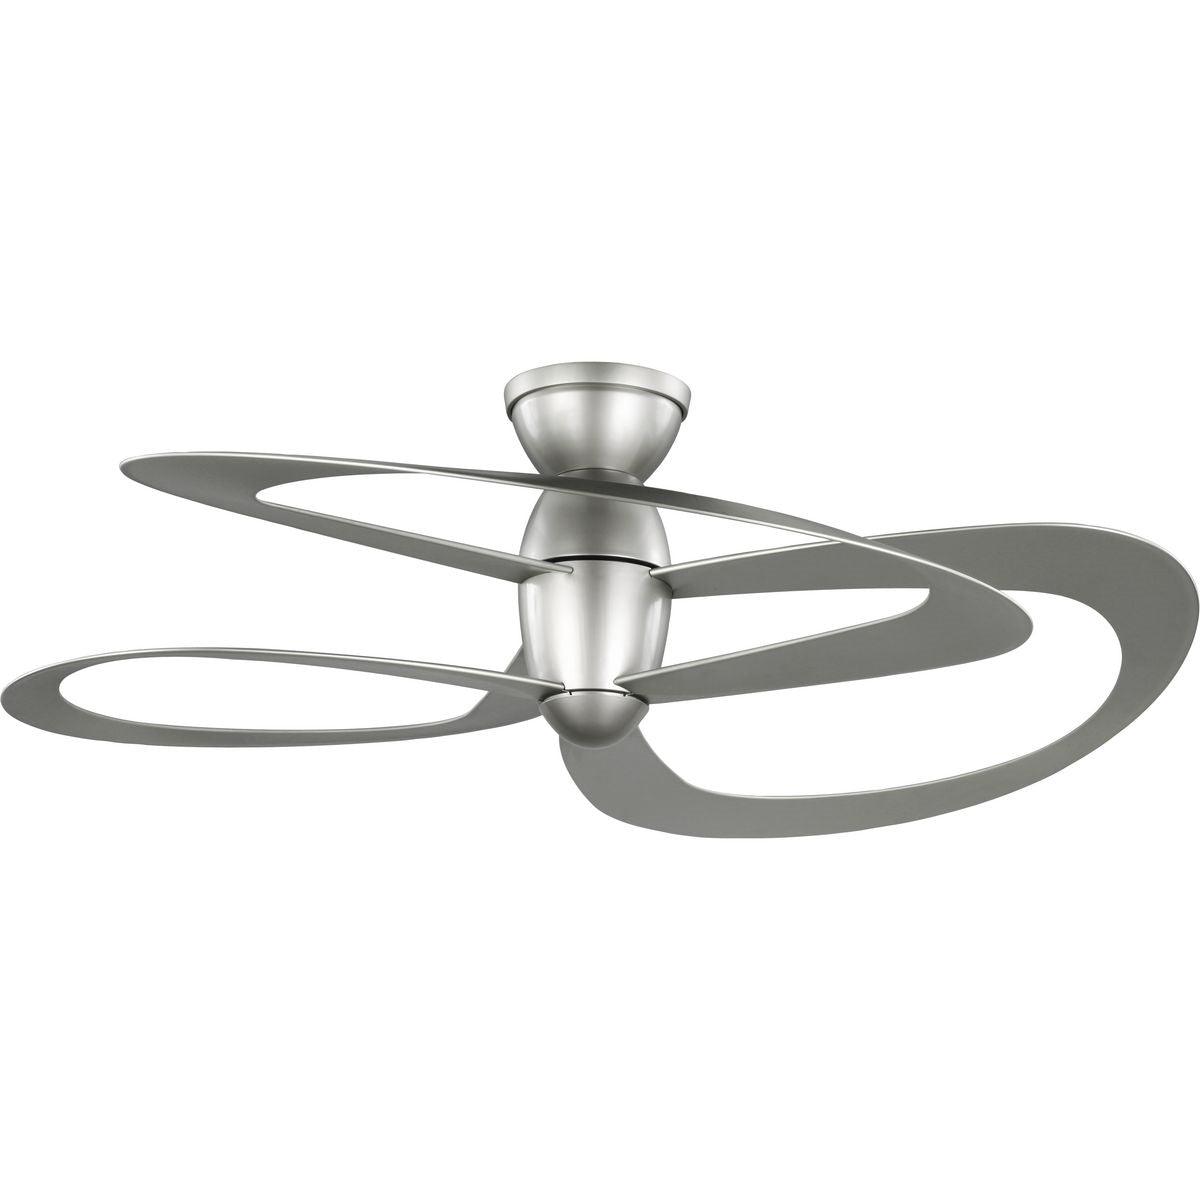 Willacy 48 Inch Flush Mount Outdoor Smart Ceiling Fan With Remote